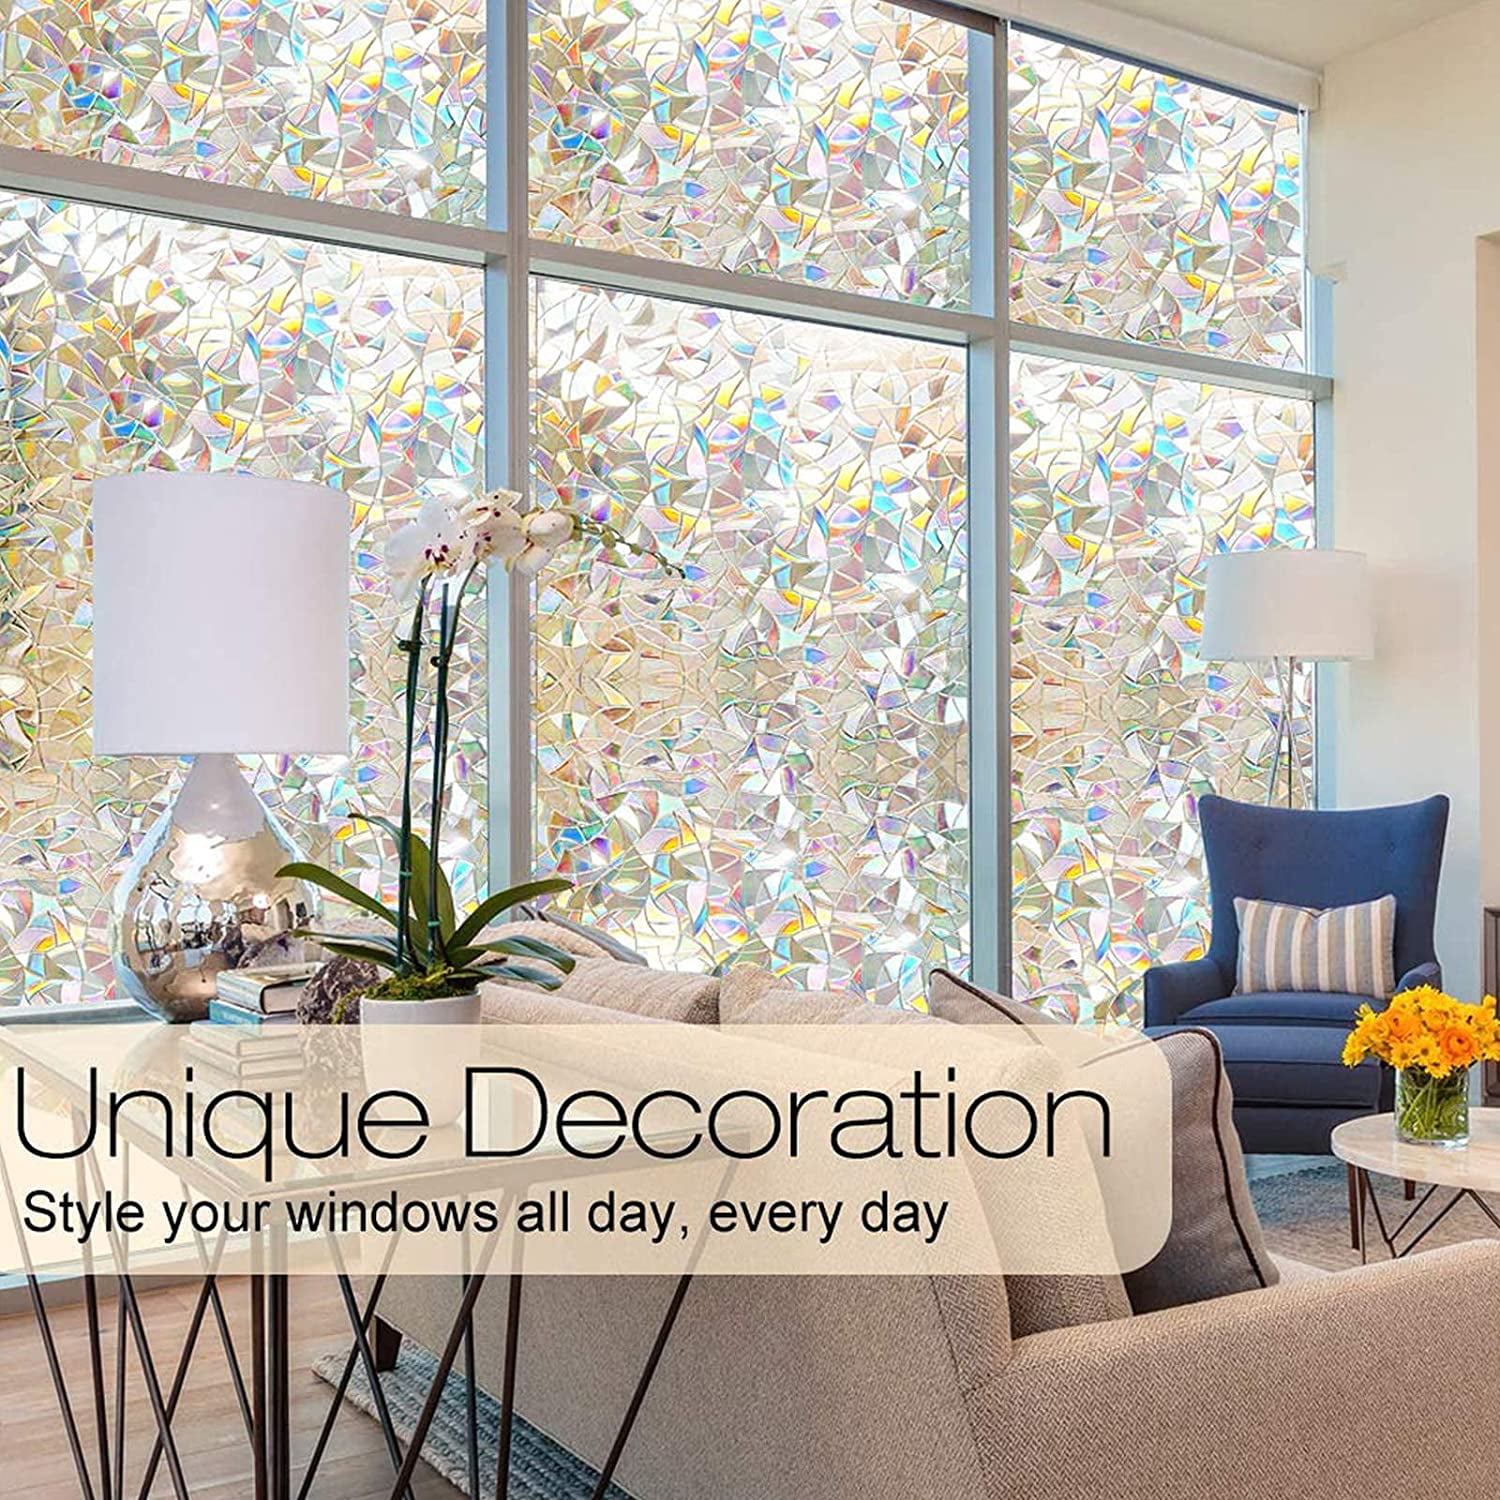 Details about   3D Rainbow Stained Glass Window Film Static Cling Sticker Privacy Home Decor 